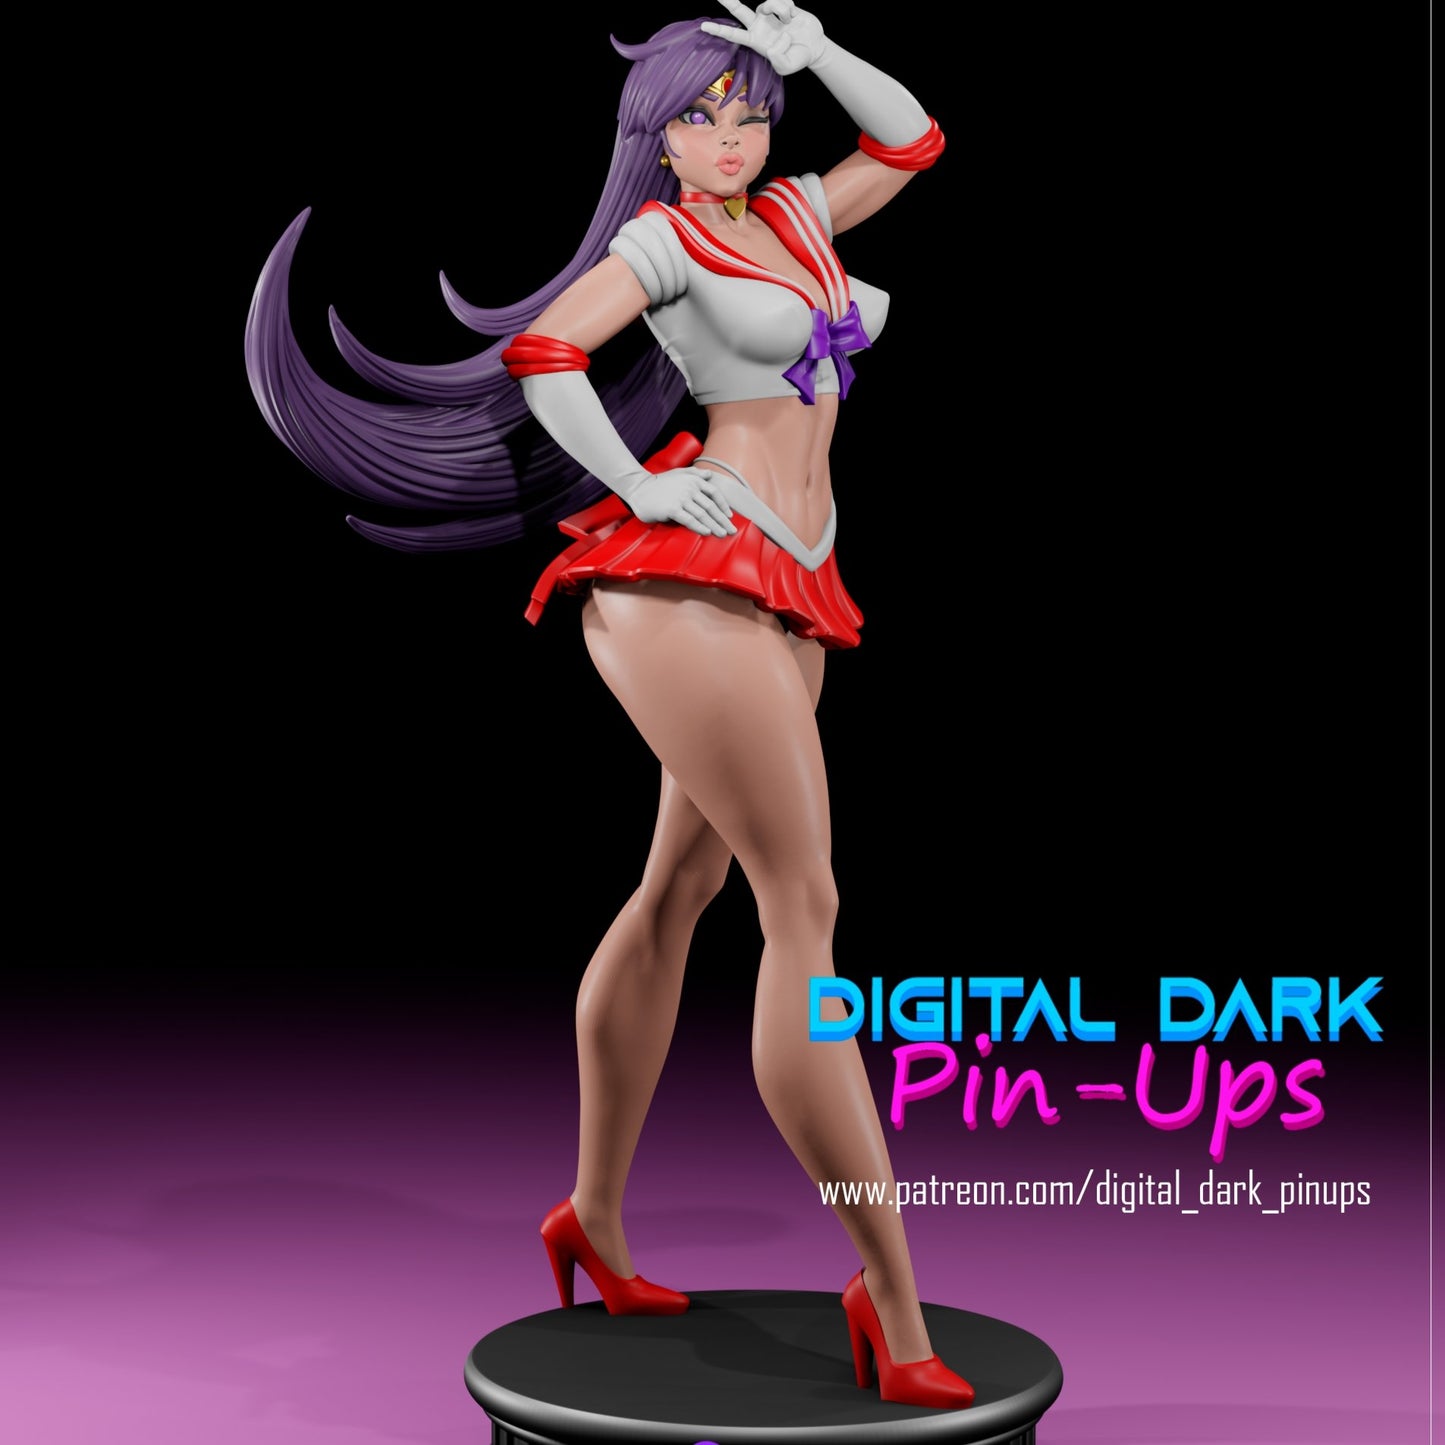 Sailor Mars 3D Printed Miniature FunArt by Digital Dark Pin-Ups Scaled Collectables Statues & Figurines